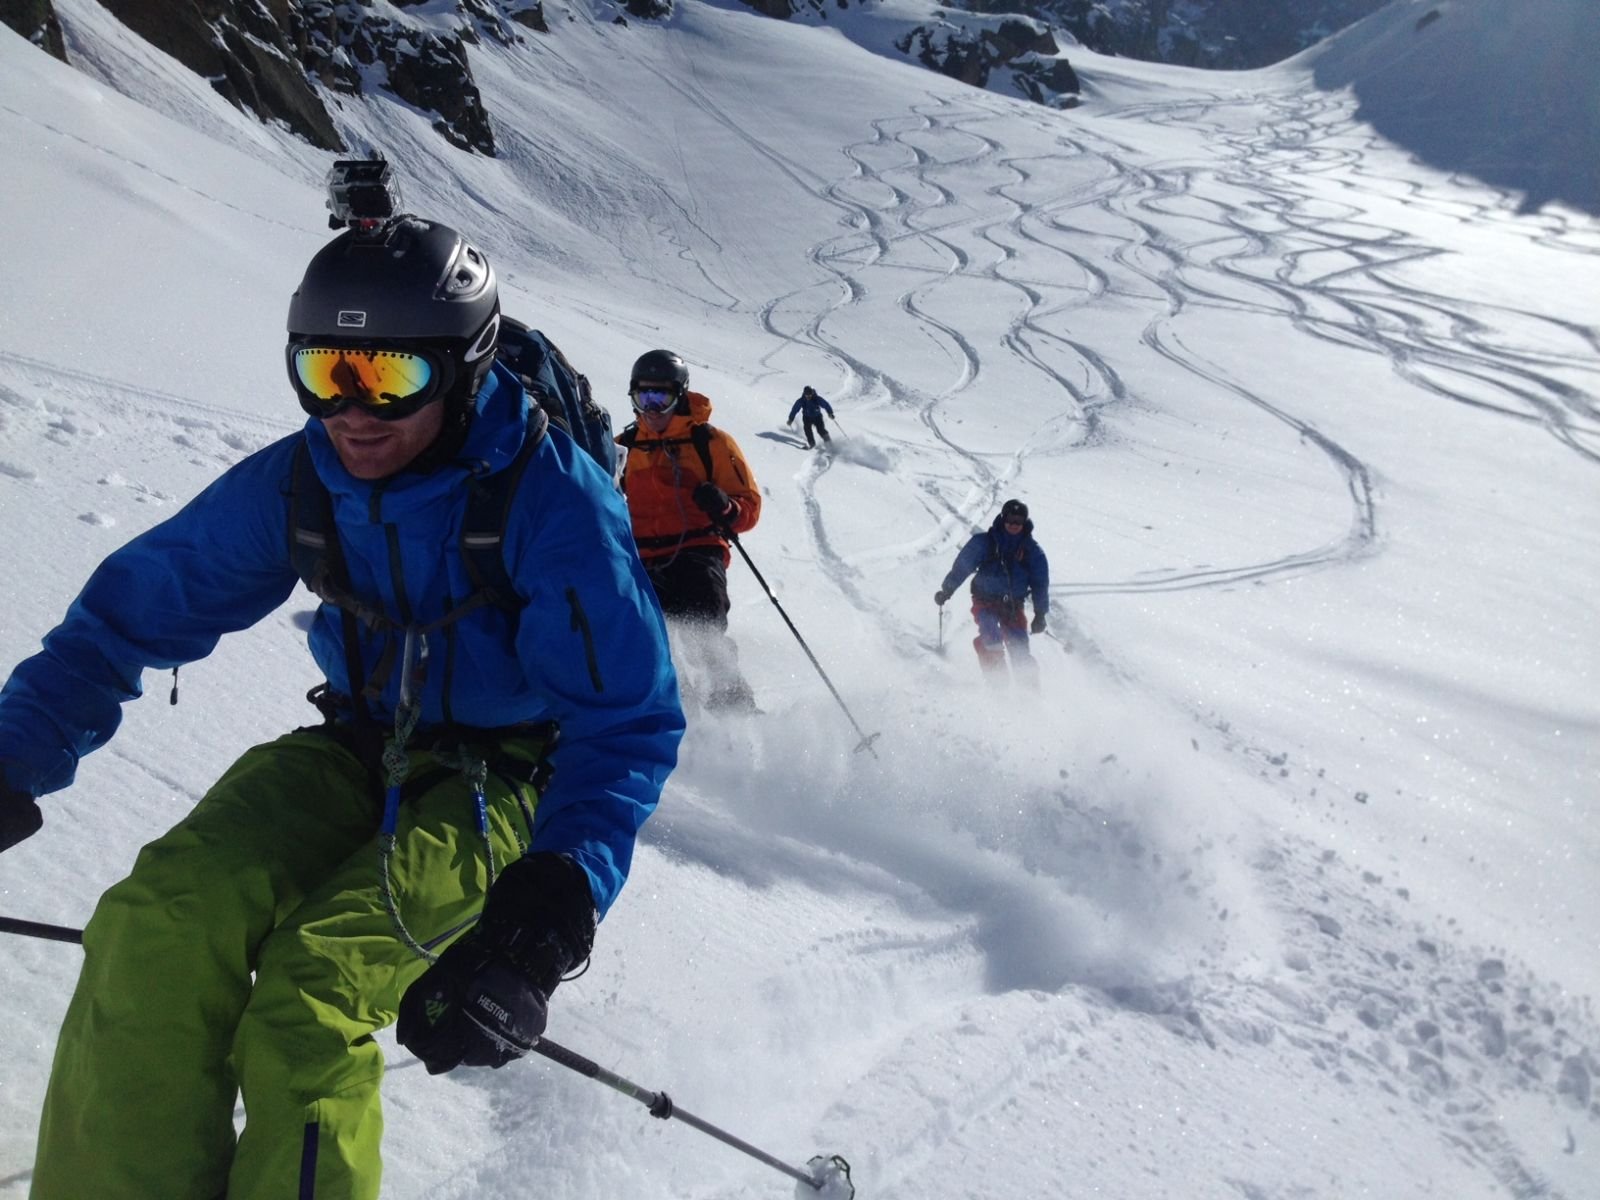 Snowboarding, skiing and mountaineering are some of the popular sports in Switzerland.